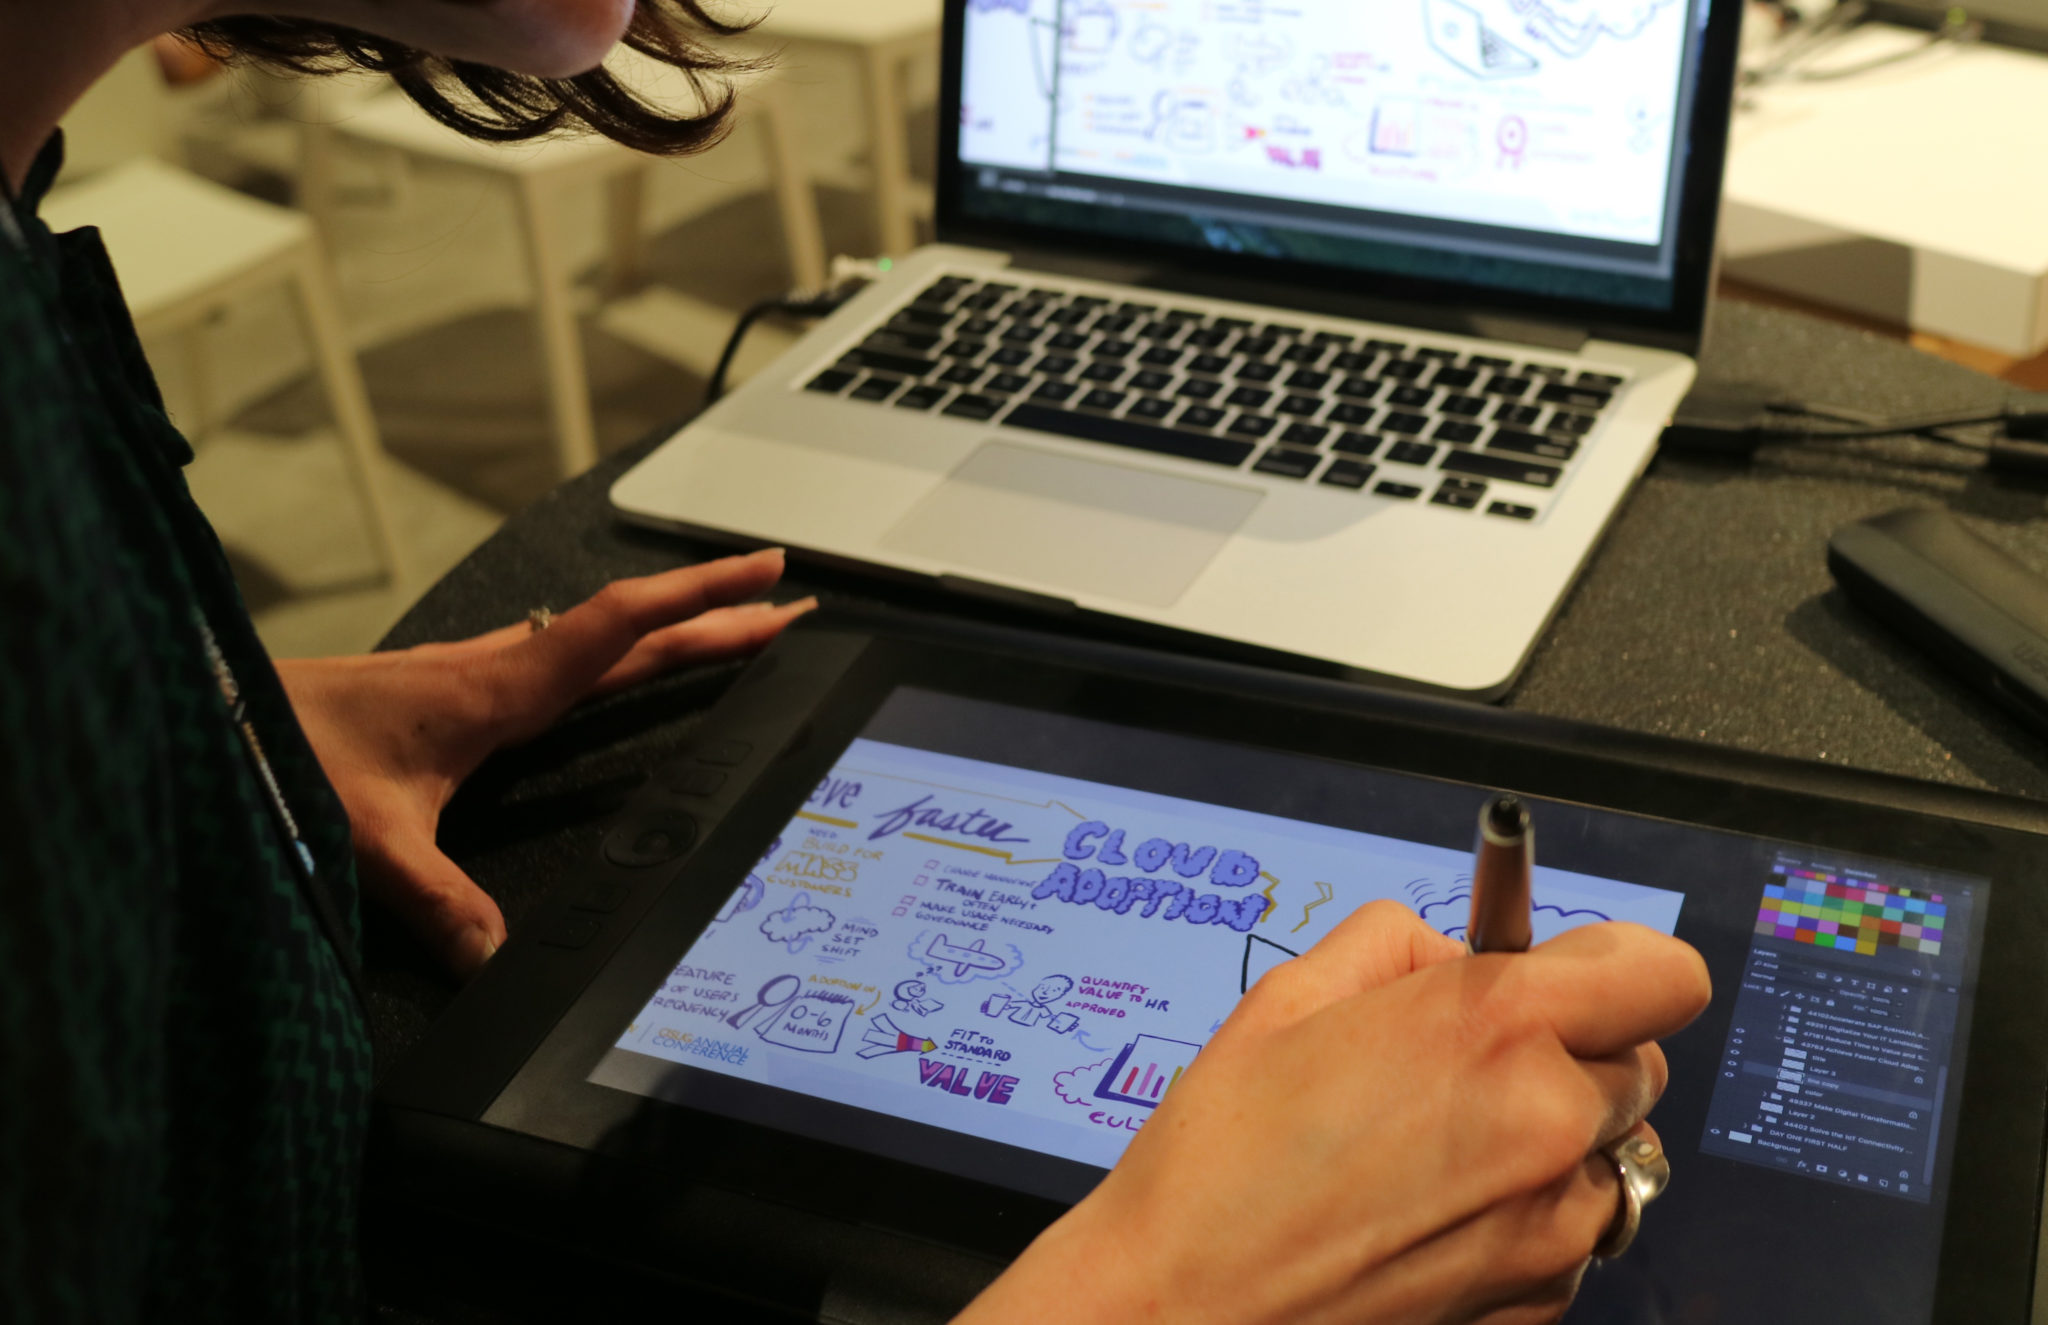 ImageThink graphic recorder uses digital technology to scribe a session online.